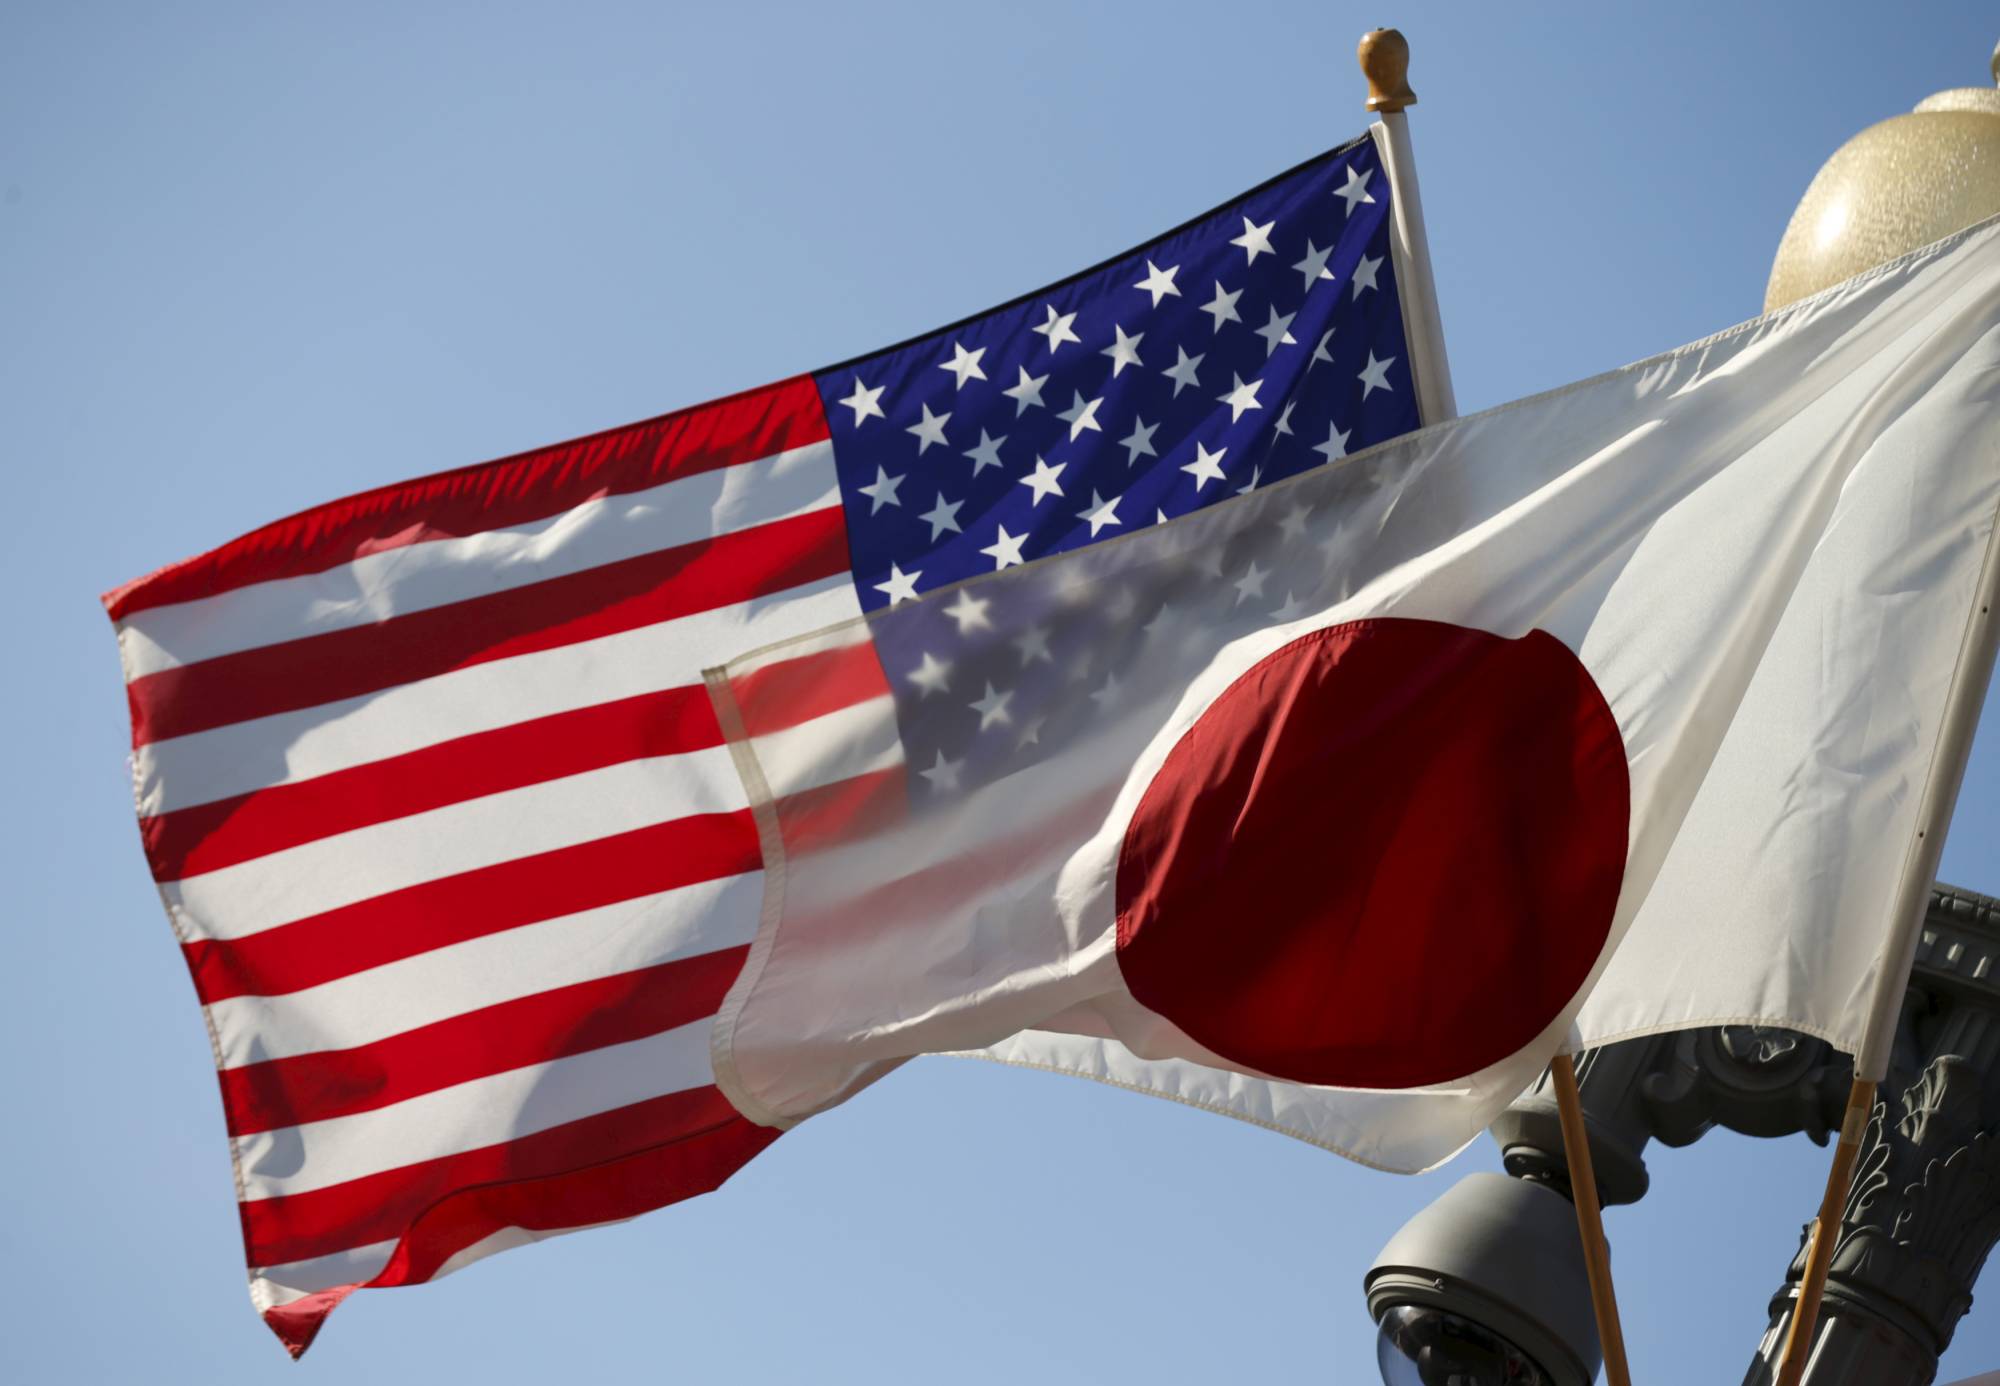 A Japanese statement released Saturday is a culmination of monthslong concerns shared by its government and the country's auto lobbying group that electric vehicle tax credits in the Inflation Reduction Act put Japanese carmakers at a disadvantage in their crucial North American market. | REUTERS